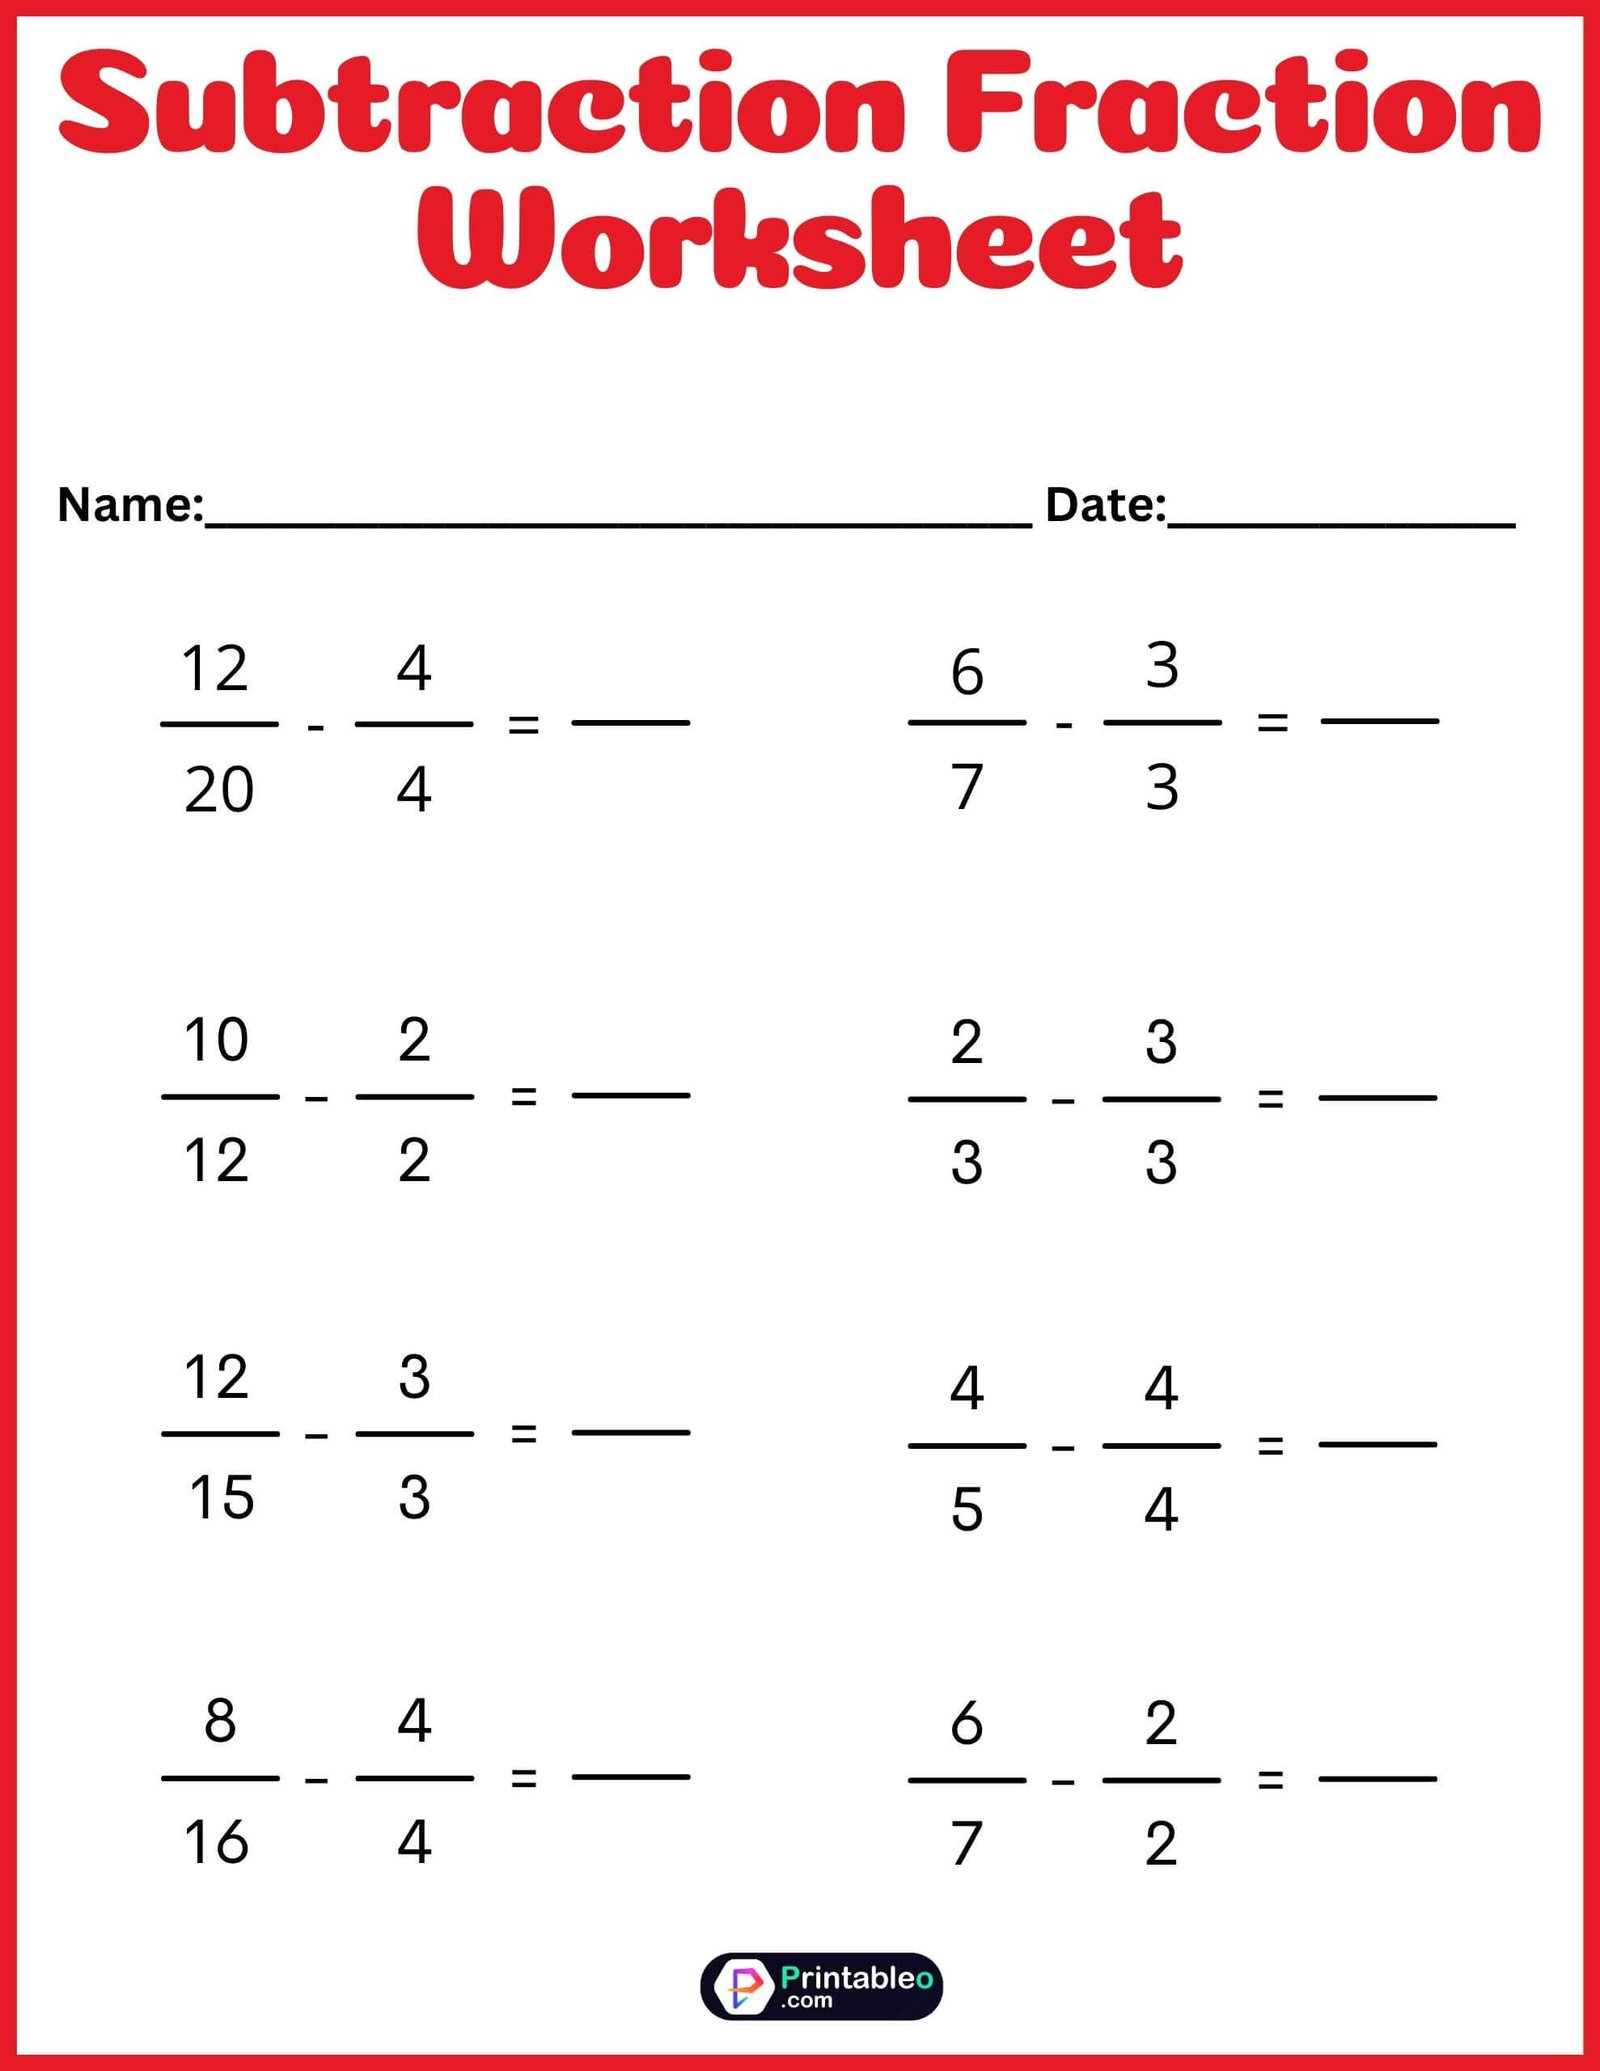 Subtractions Fraction Worksheets